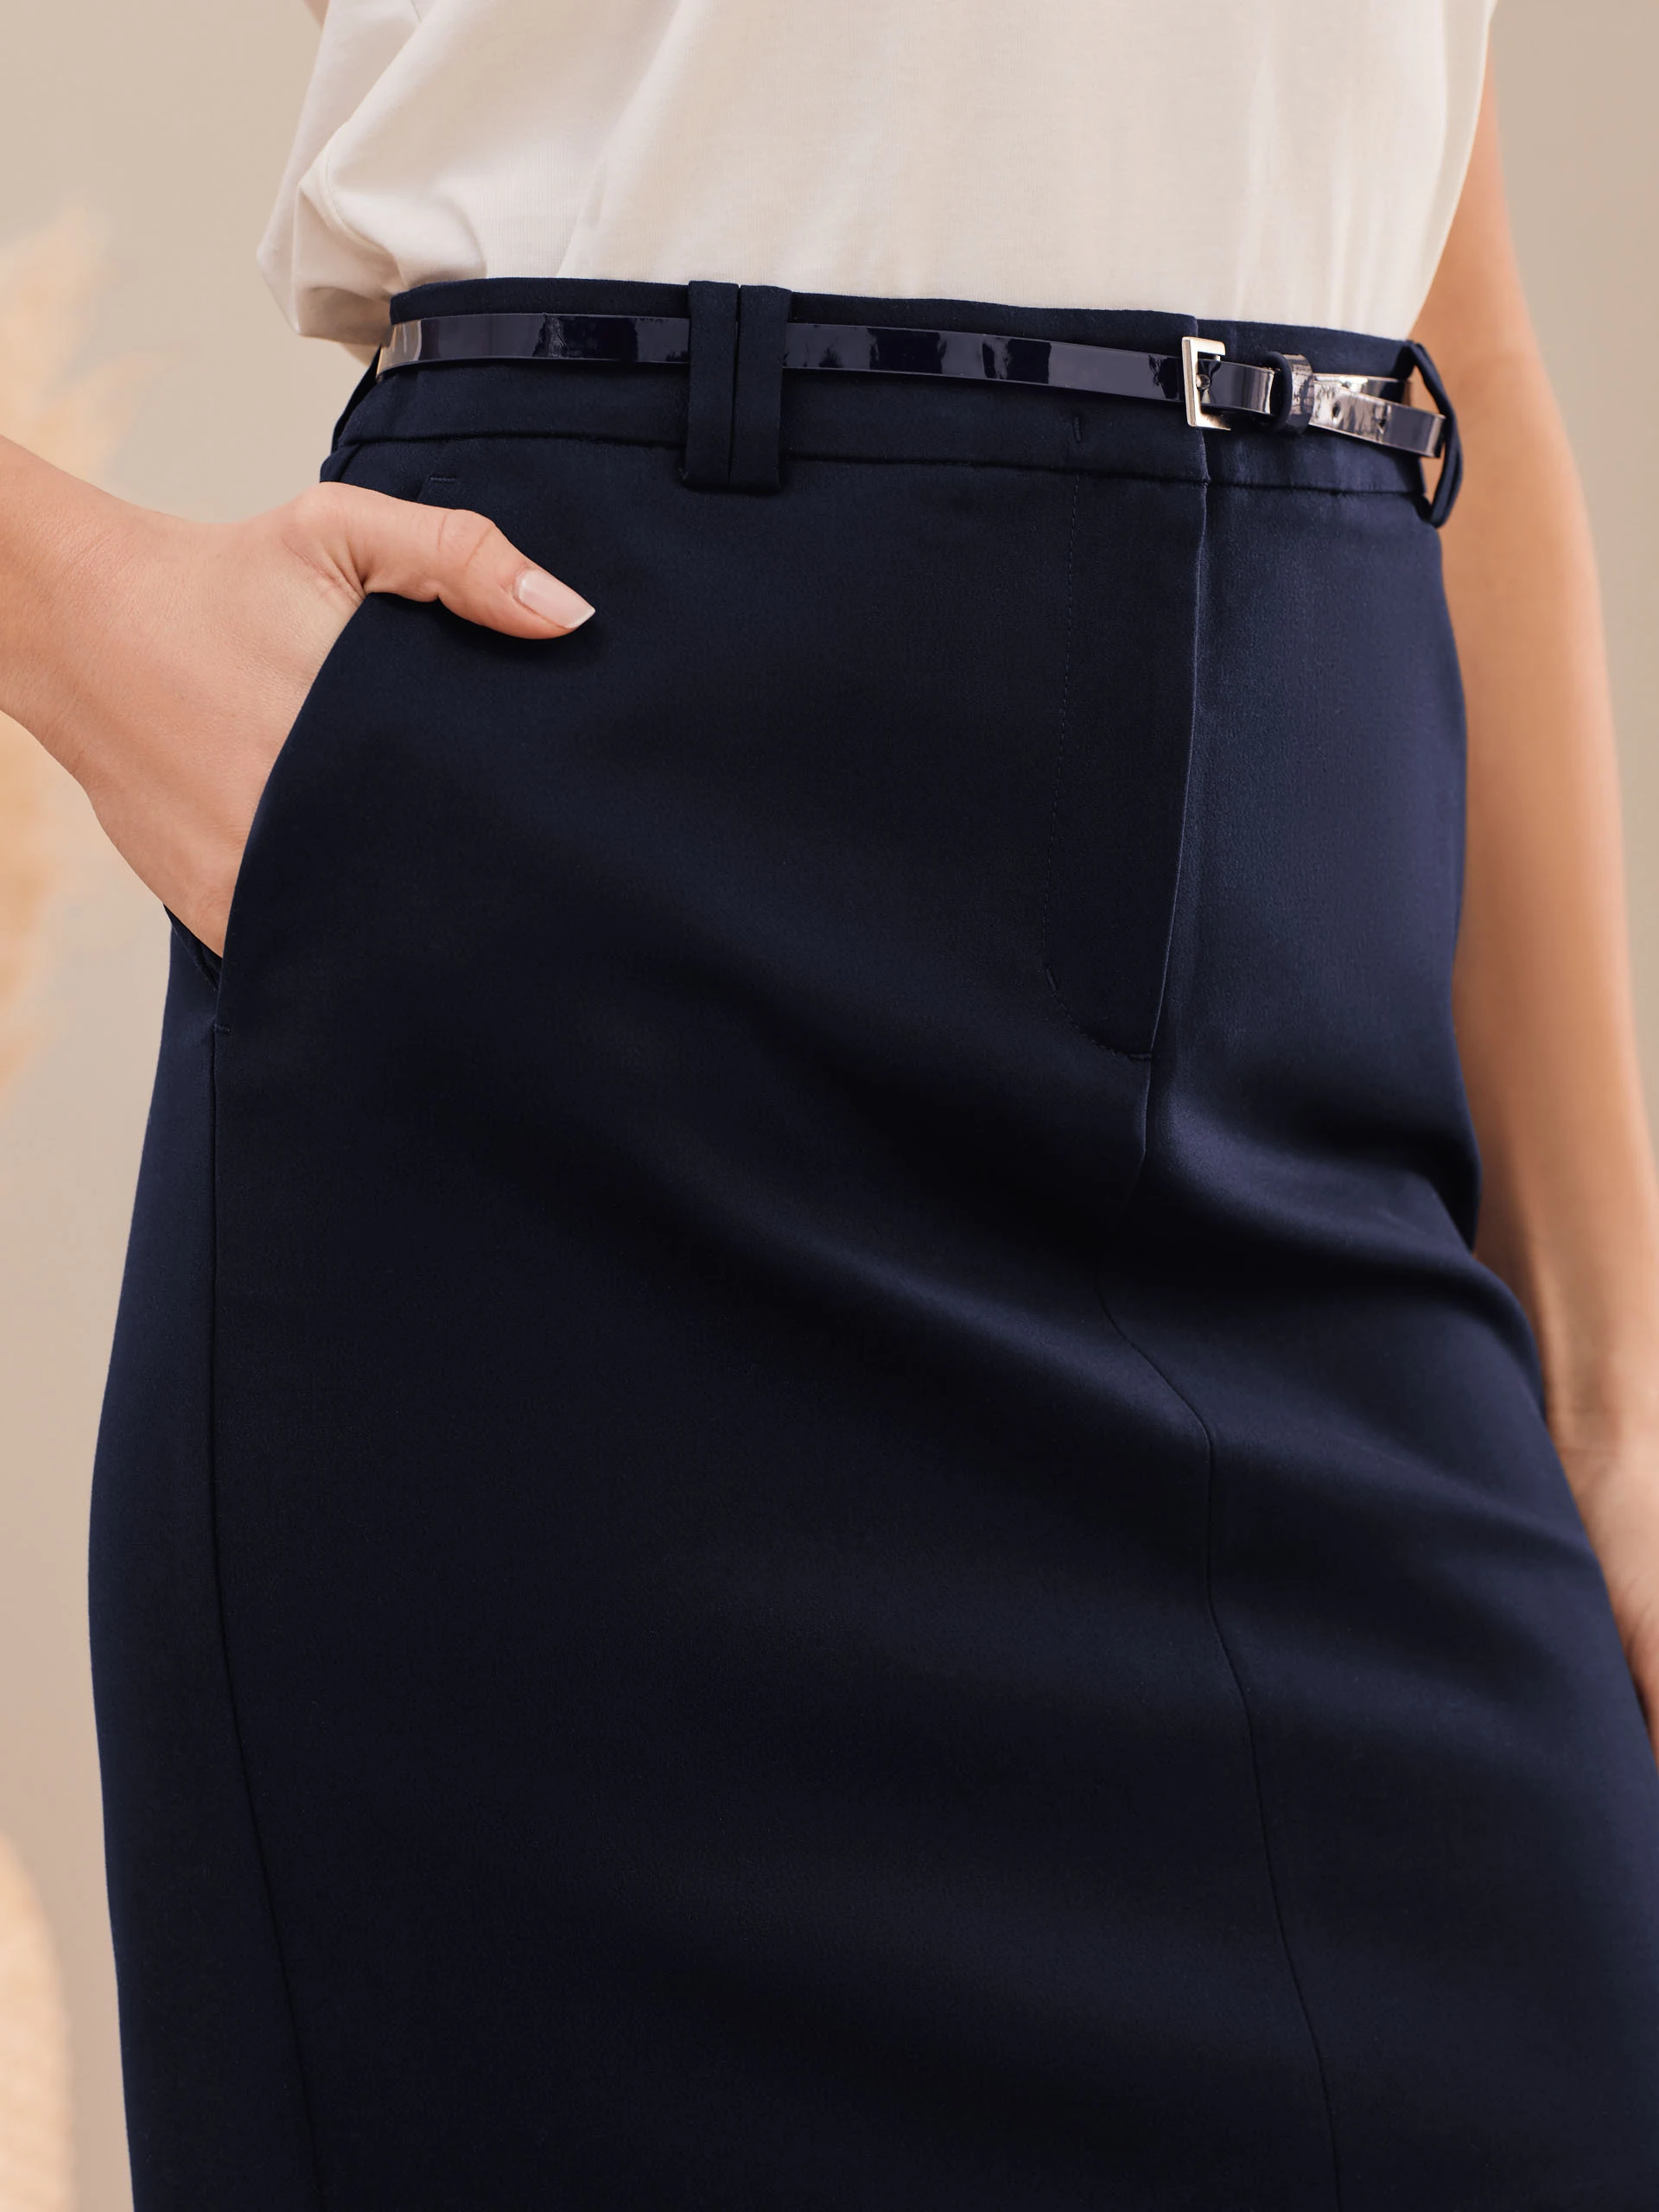 NAVY BLUE FITTED SKIRT